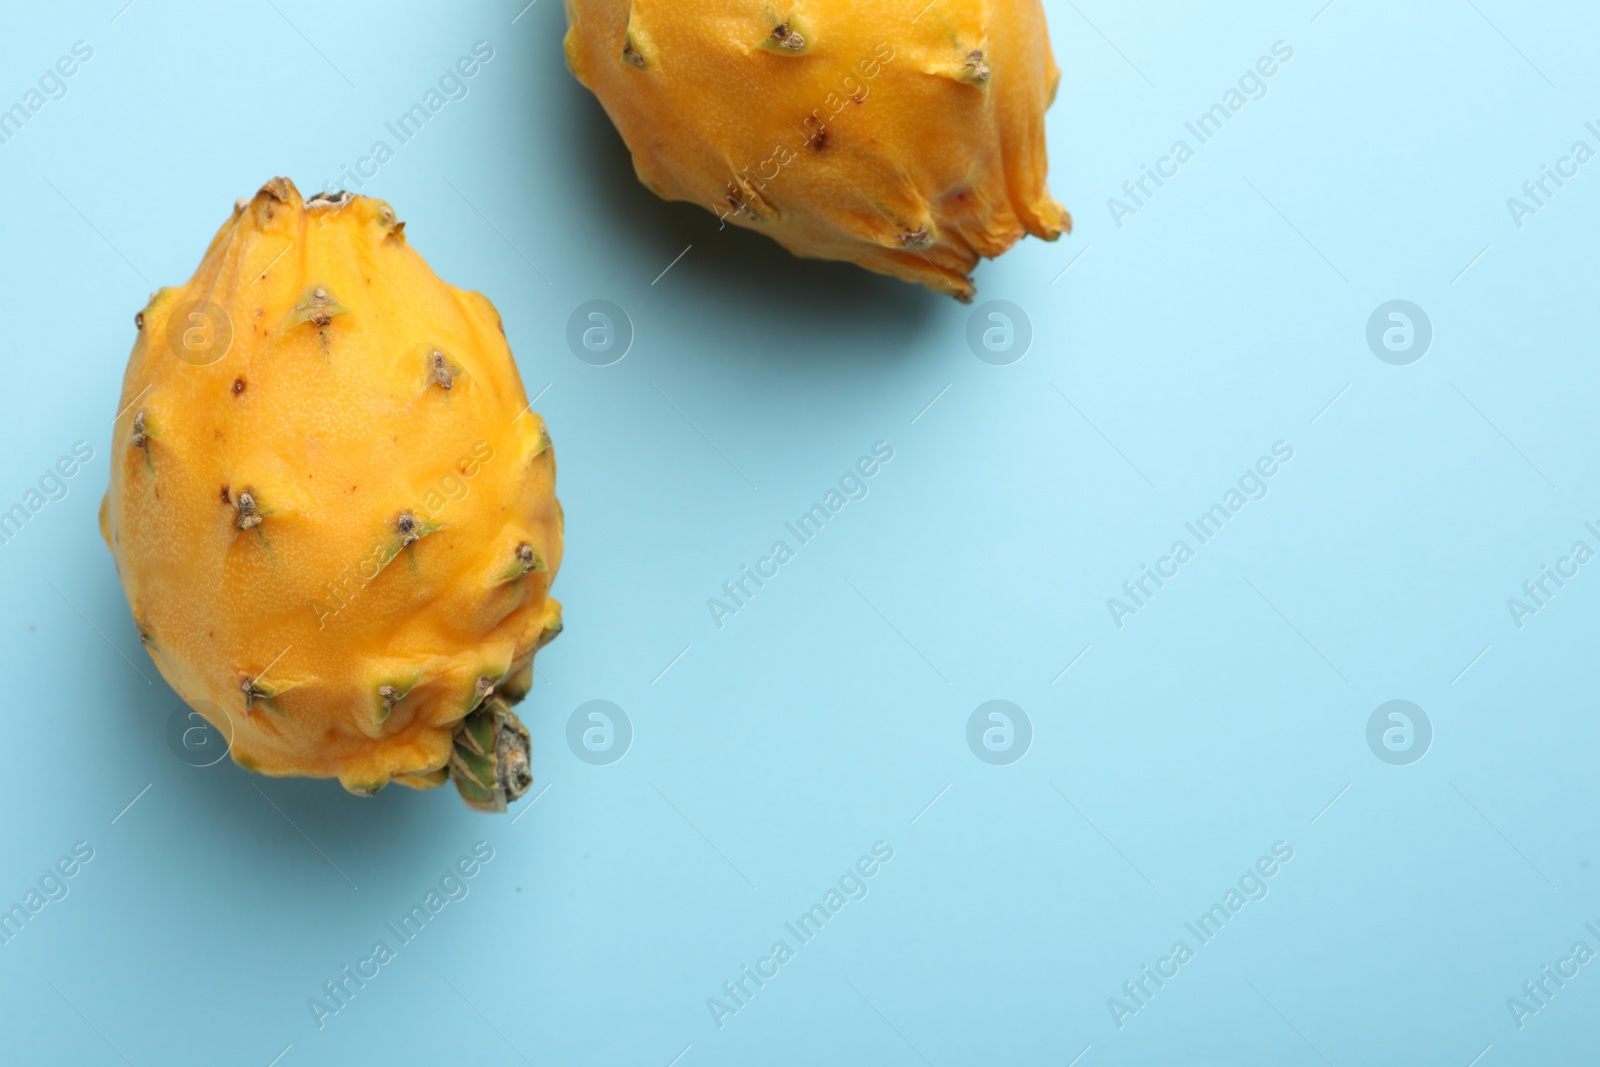 Photo of Delicious yellow pitahaya fruits on light blue background, flat lay. Space for text